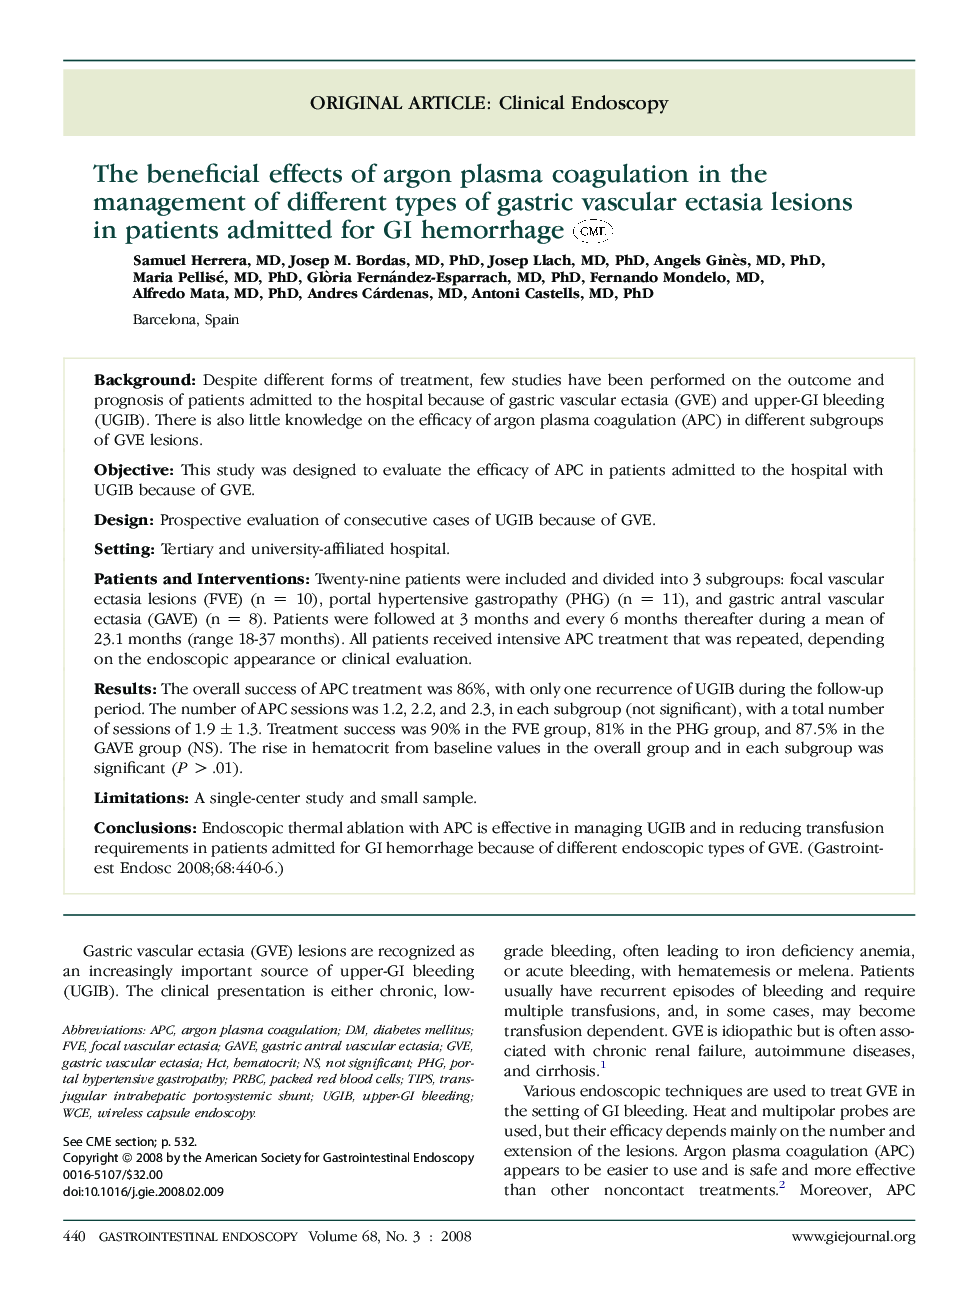 The beneficial effects of argon plasma coagulation in the management of different types of gastric vascular ectasia lesions in patients admitted for GI hemorrhage 